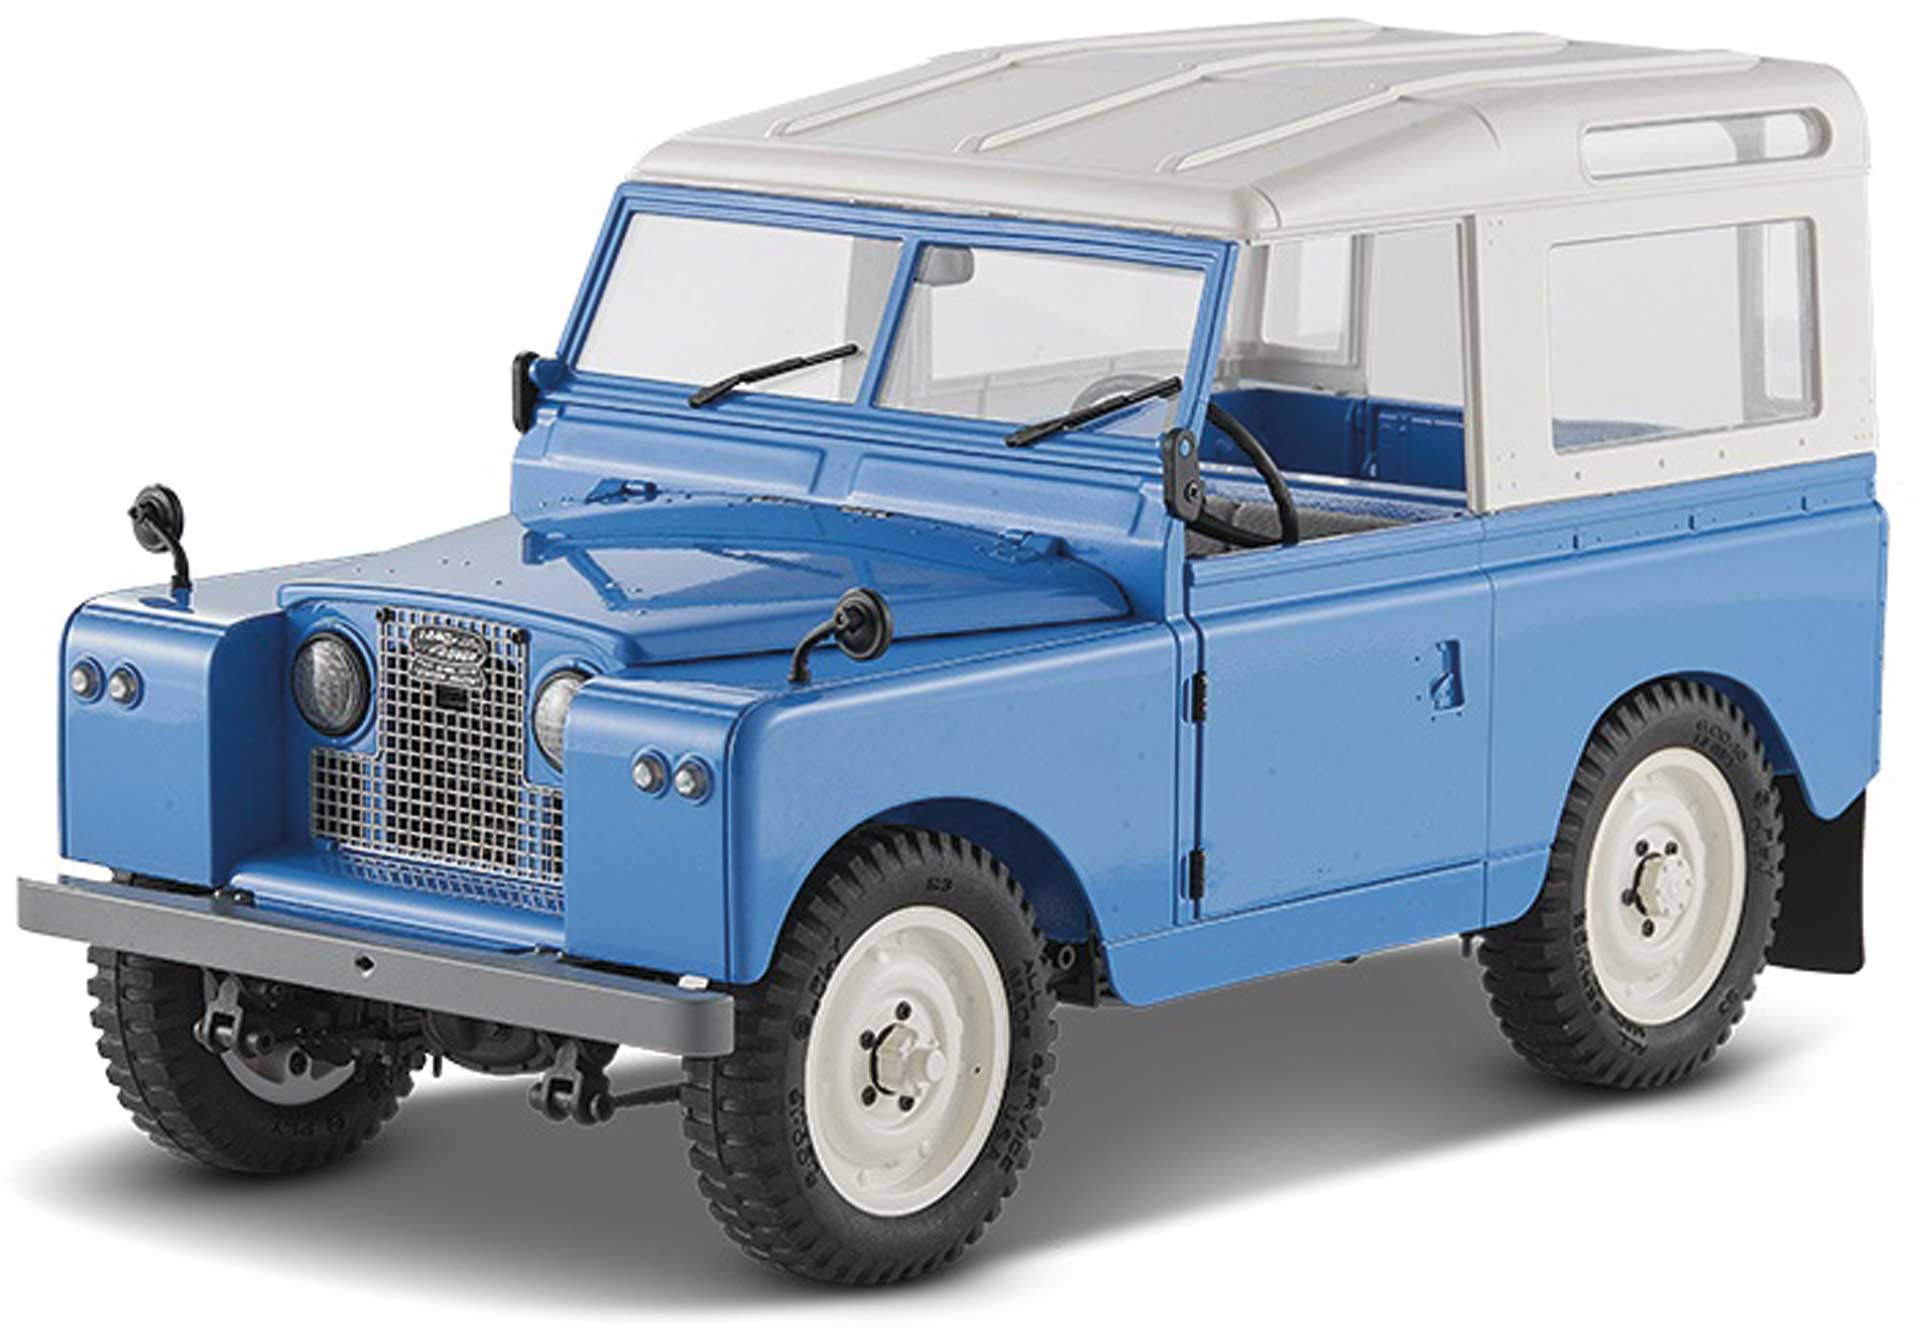 FMS Land Rover Series II blue 1:12 - Crawler RTR 2.4GHz